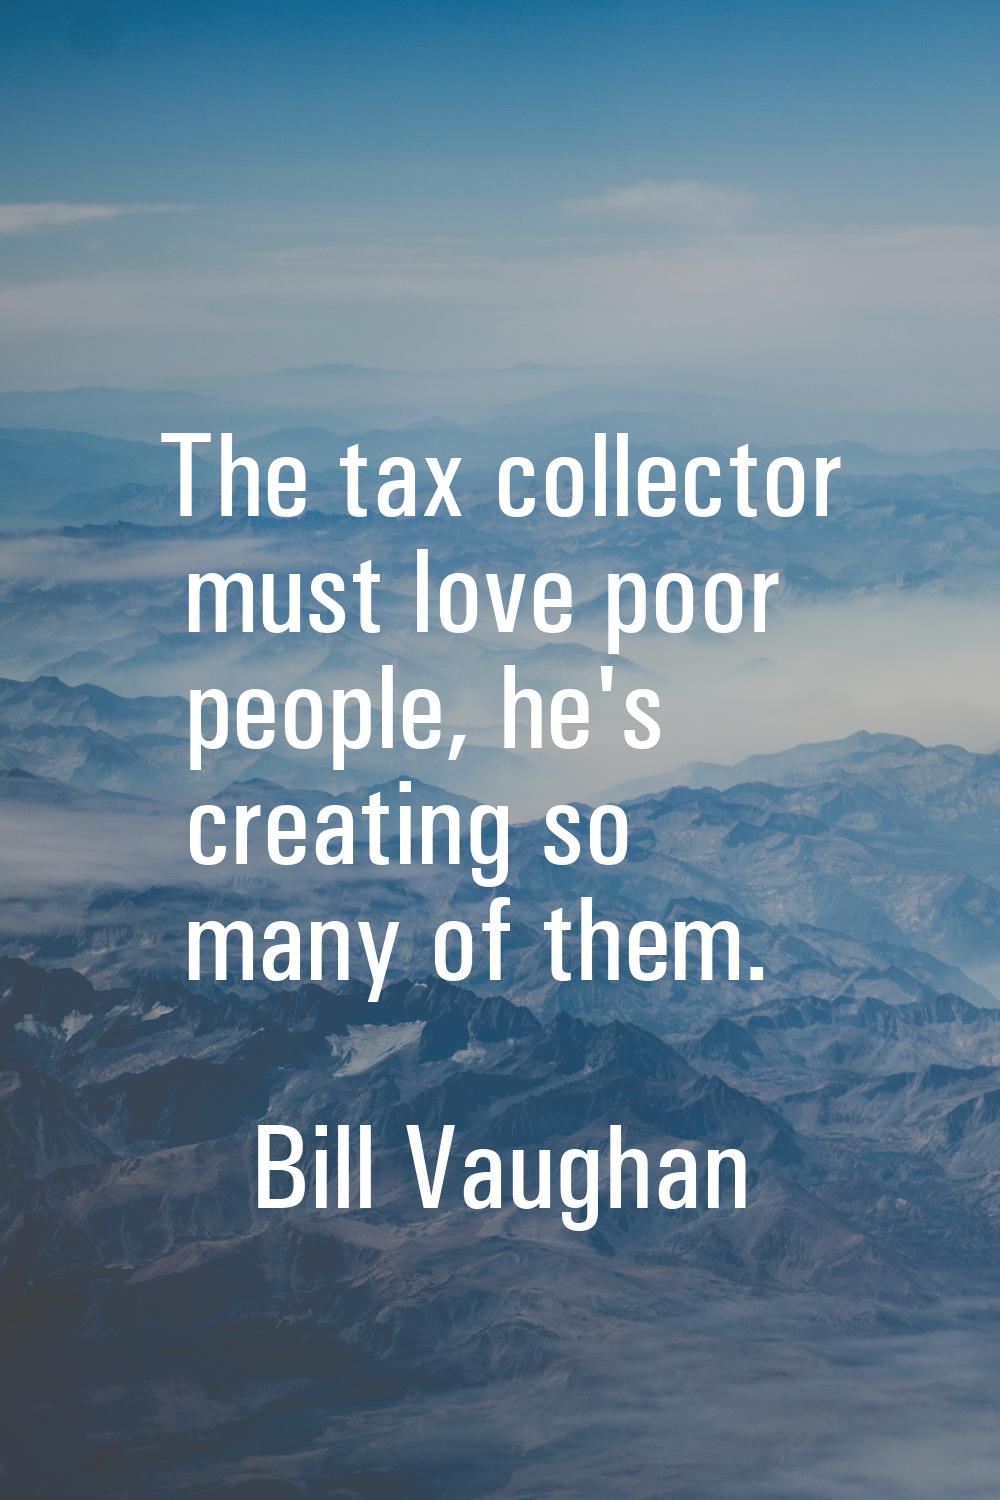 The tax collector must love poor people, he's creating so many of them.